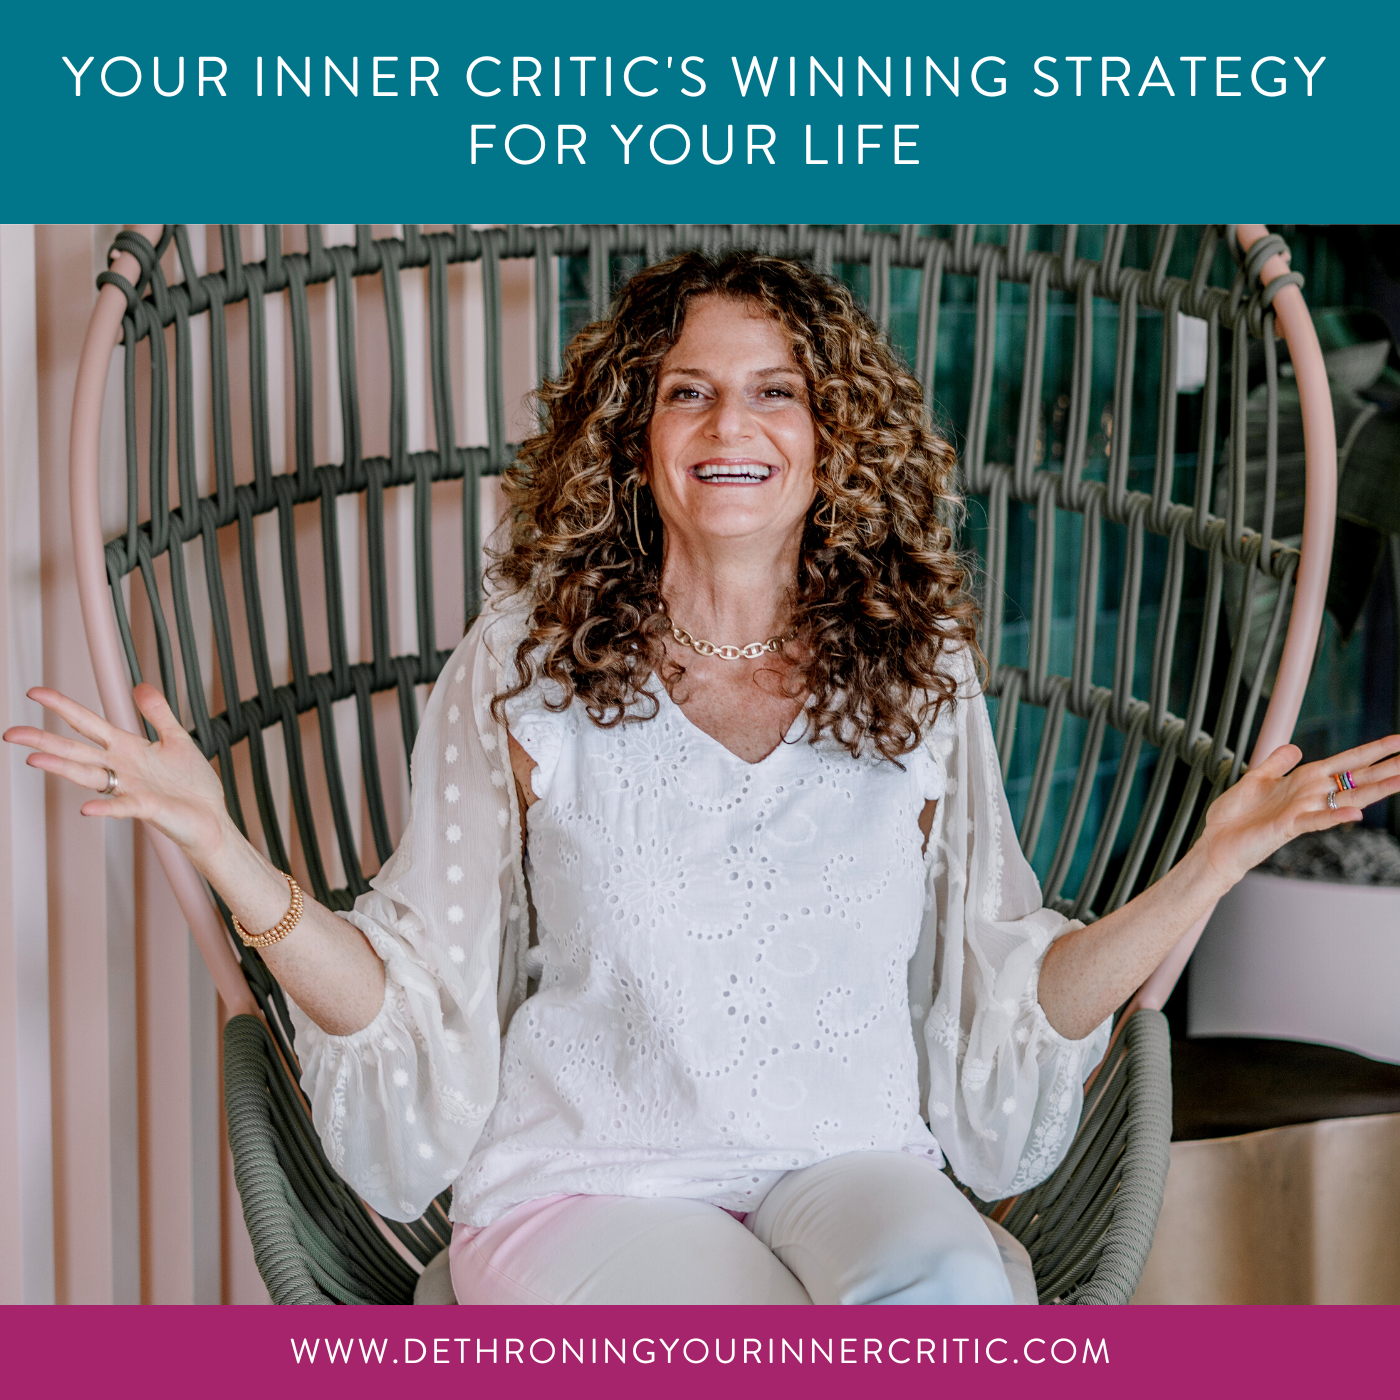 Your Inner Critic's winning strategy for your life